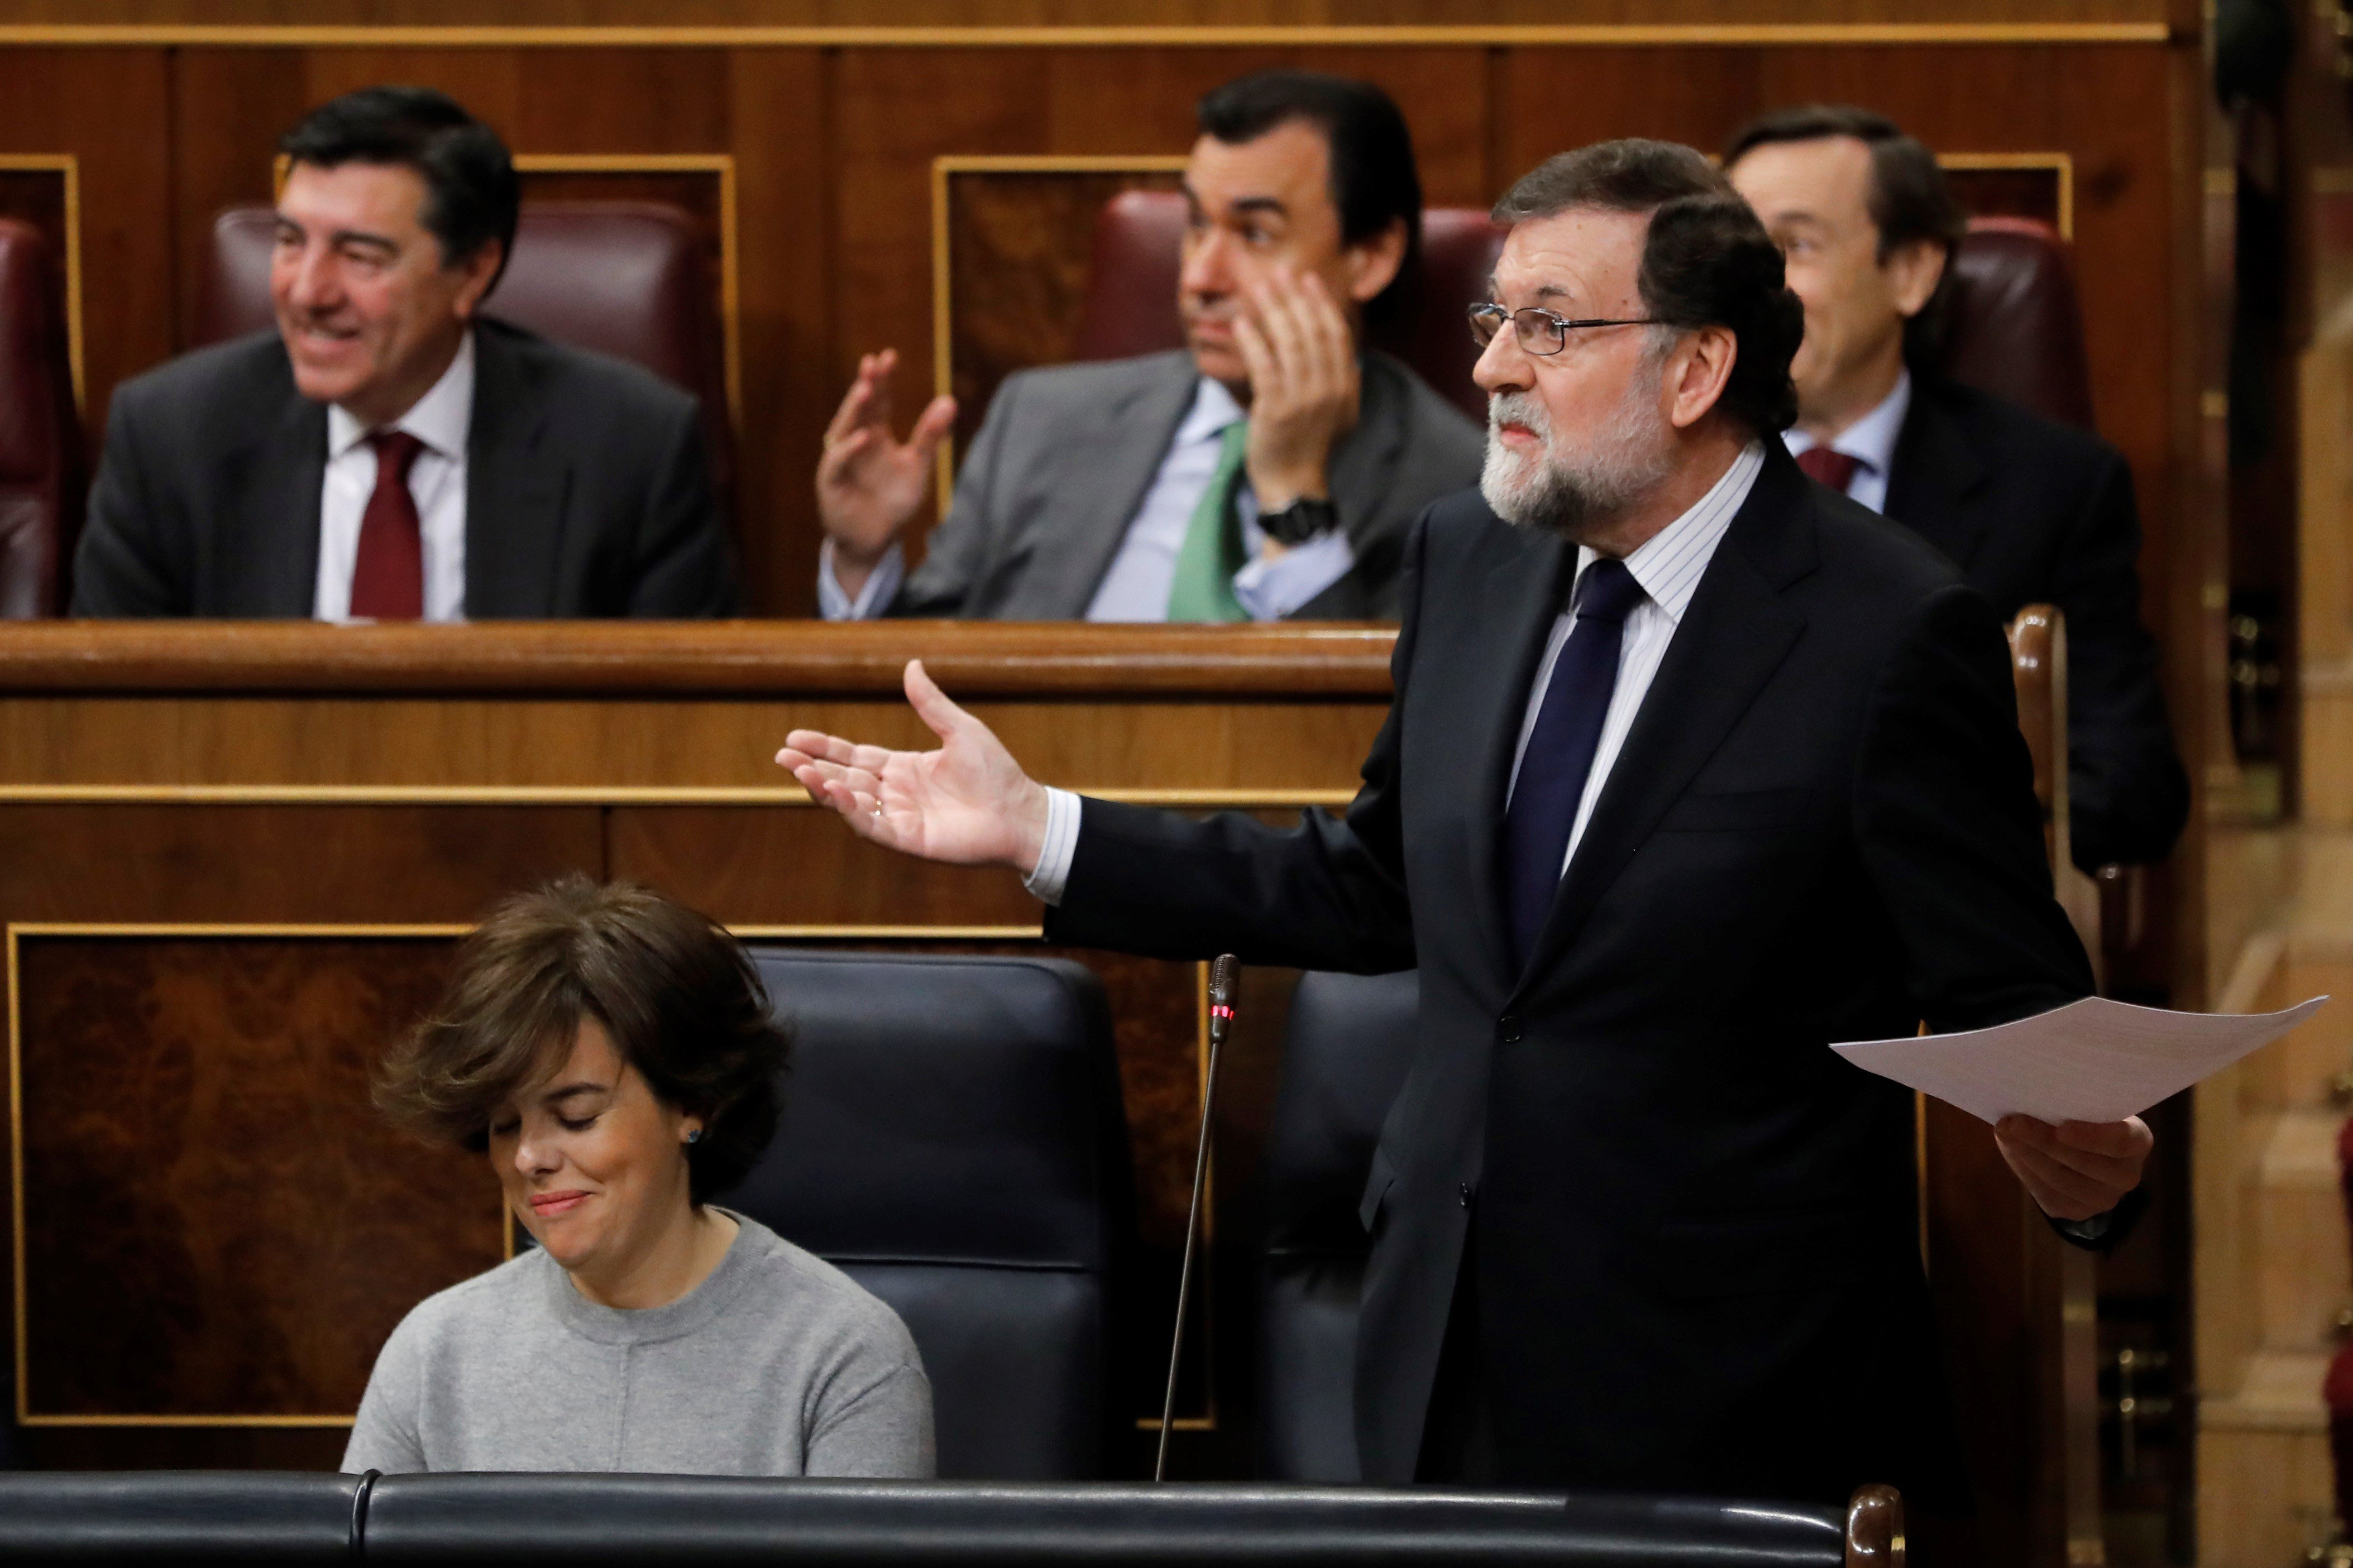 The video where Rajoy admits Puigdemont did not misuse public funds on referendum